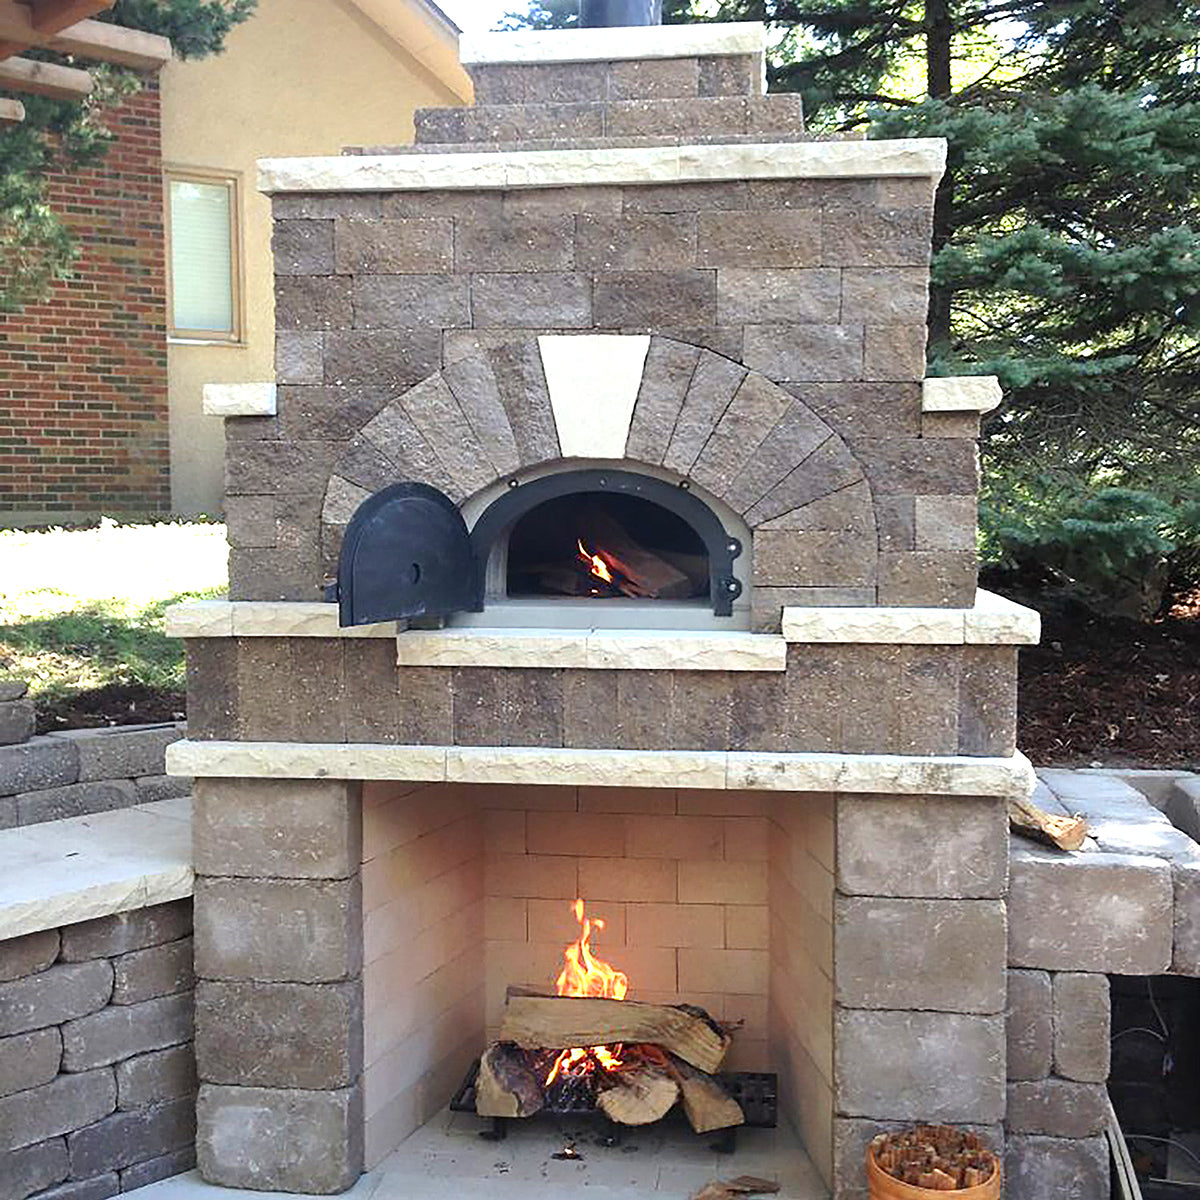 Chicago Brick Oven 500 DIY Kit | Wood Fired Pizza Oven | Flexibility Meets Affordability | 27" x 22" Cooking Surface